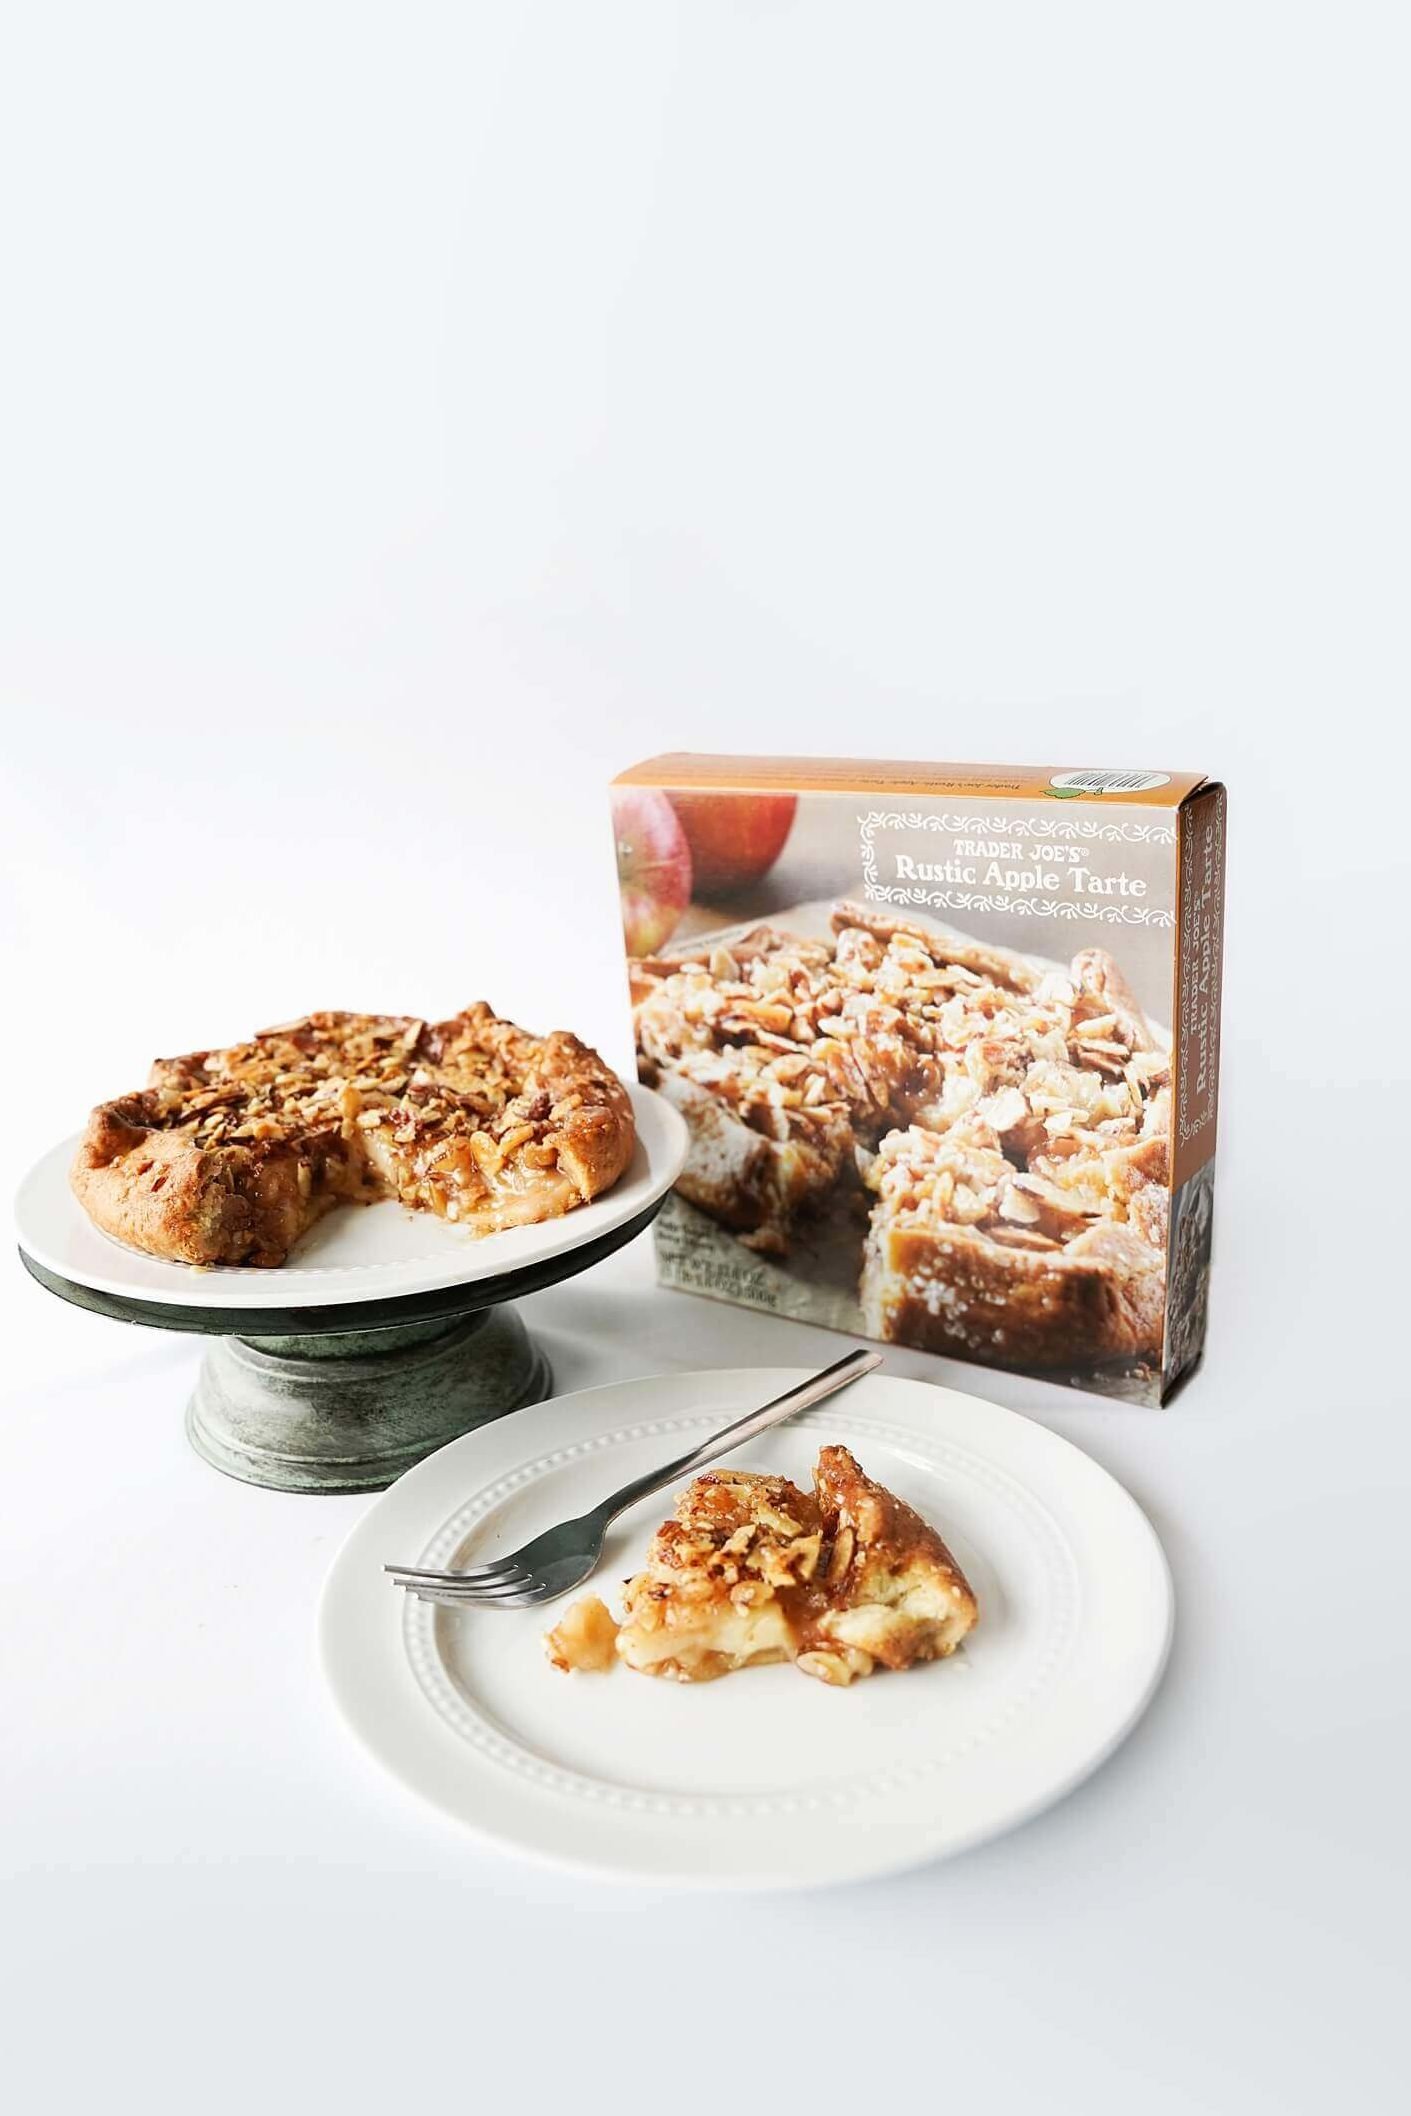 Trader Joe's Rustic Apple Tart in box, on pie plate and slice on plate